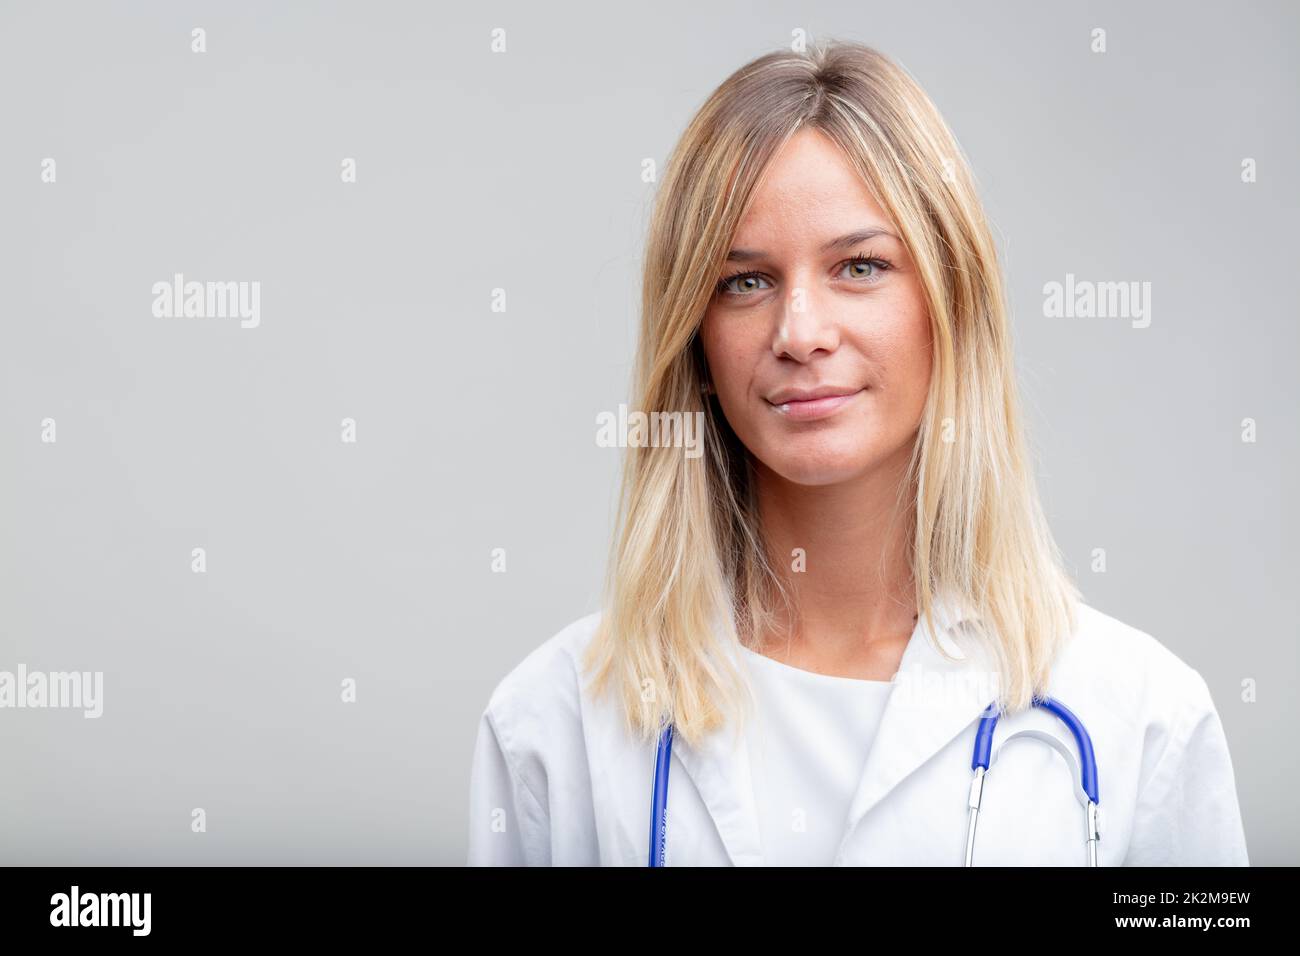 Attractive young female nurse or doctor Stock Photo